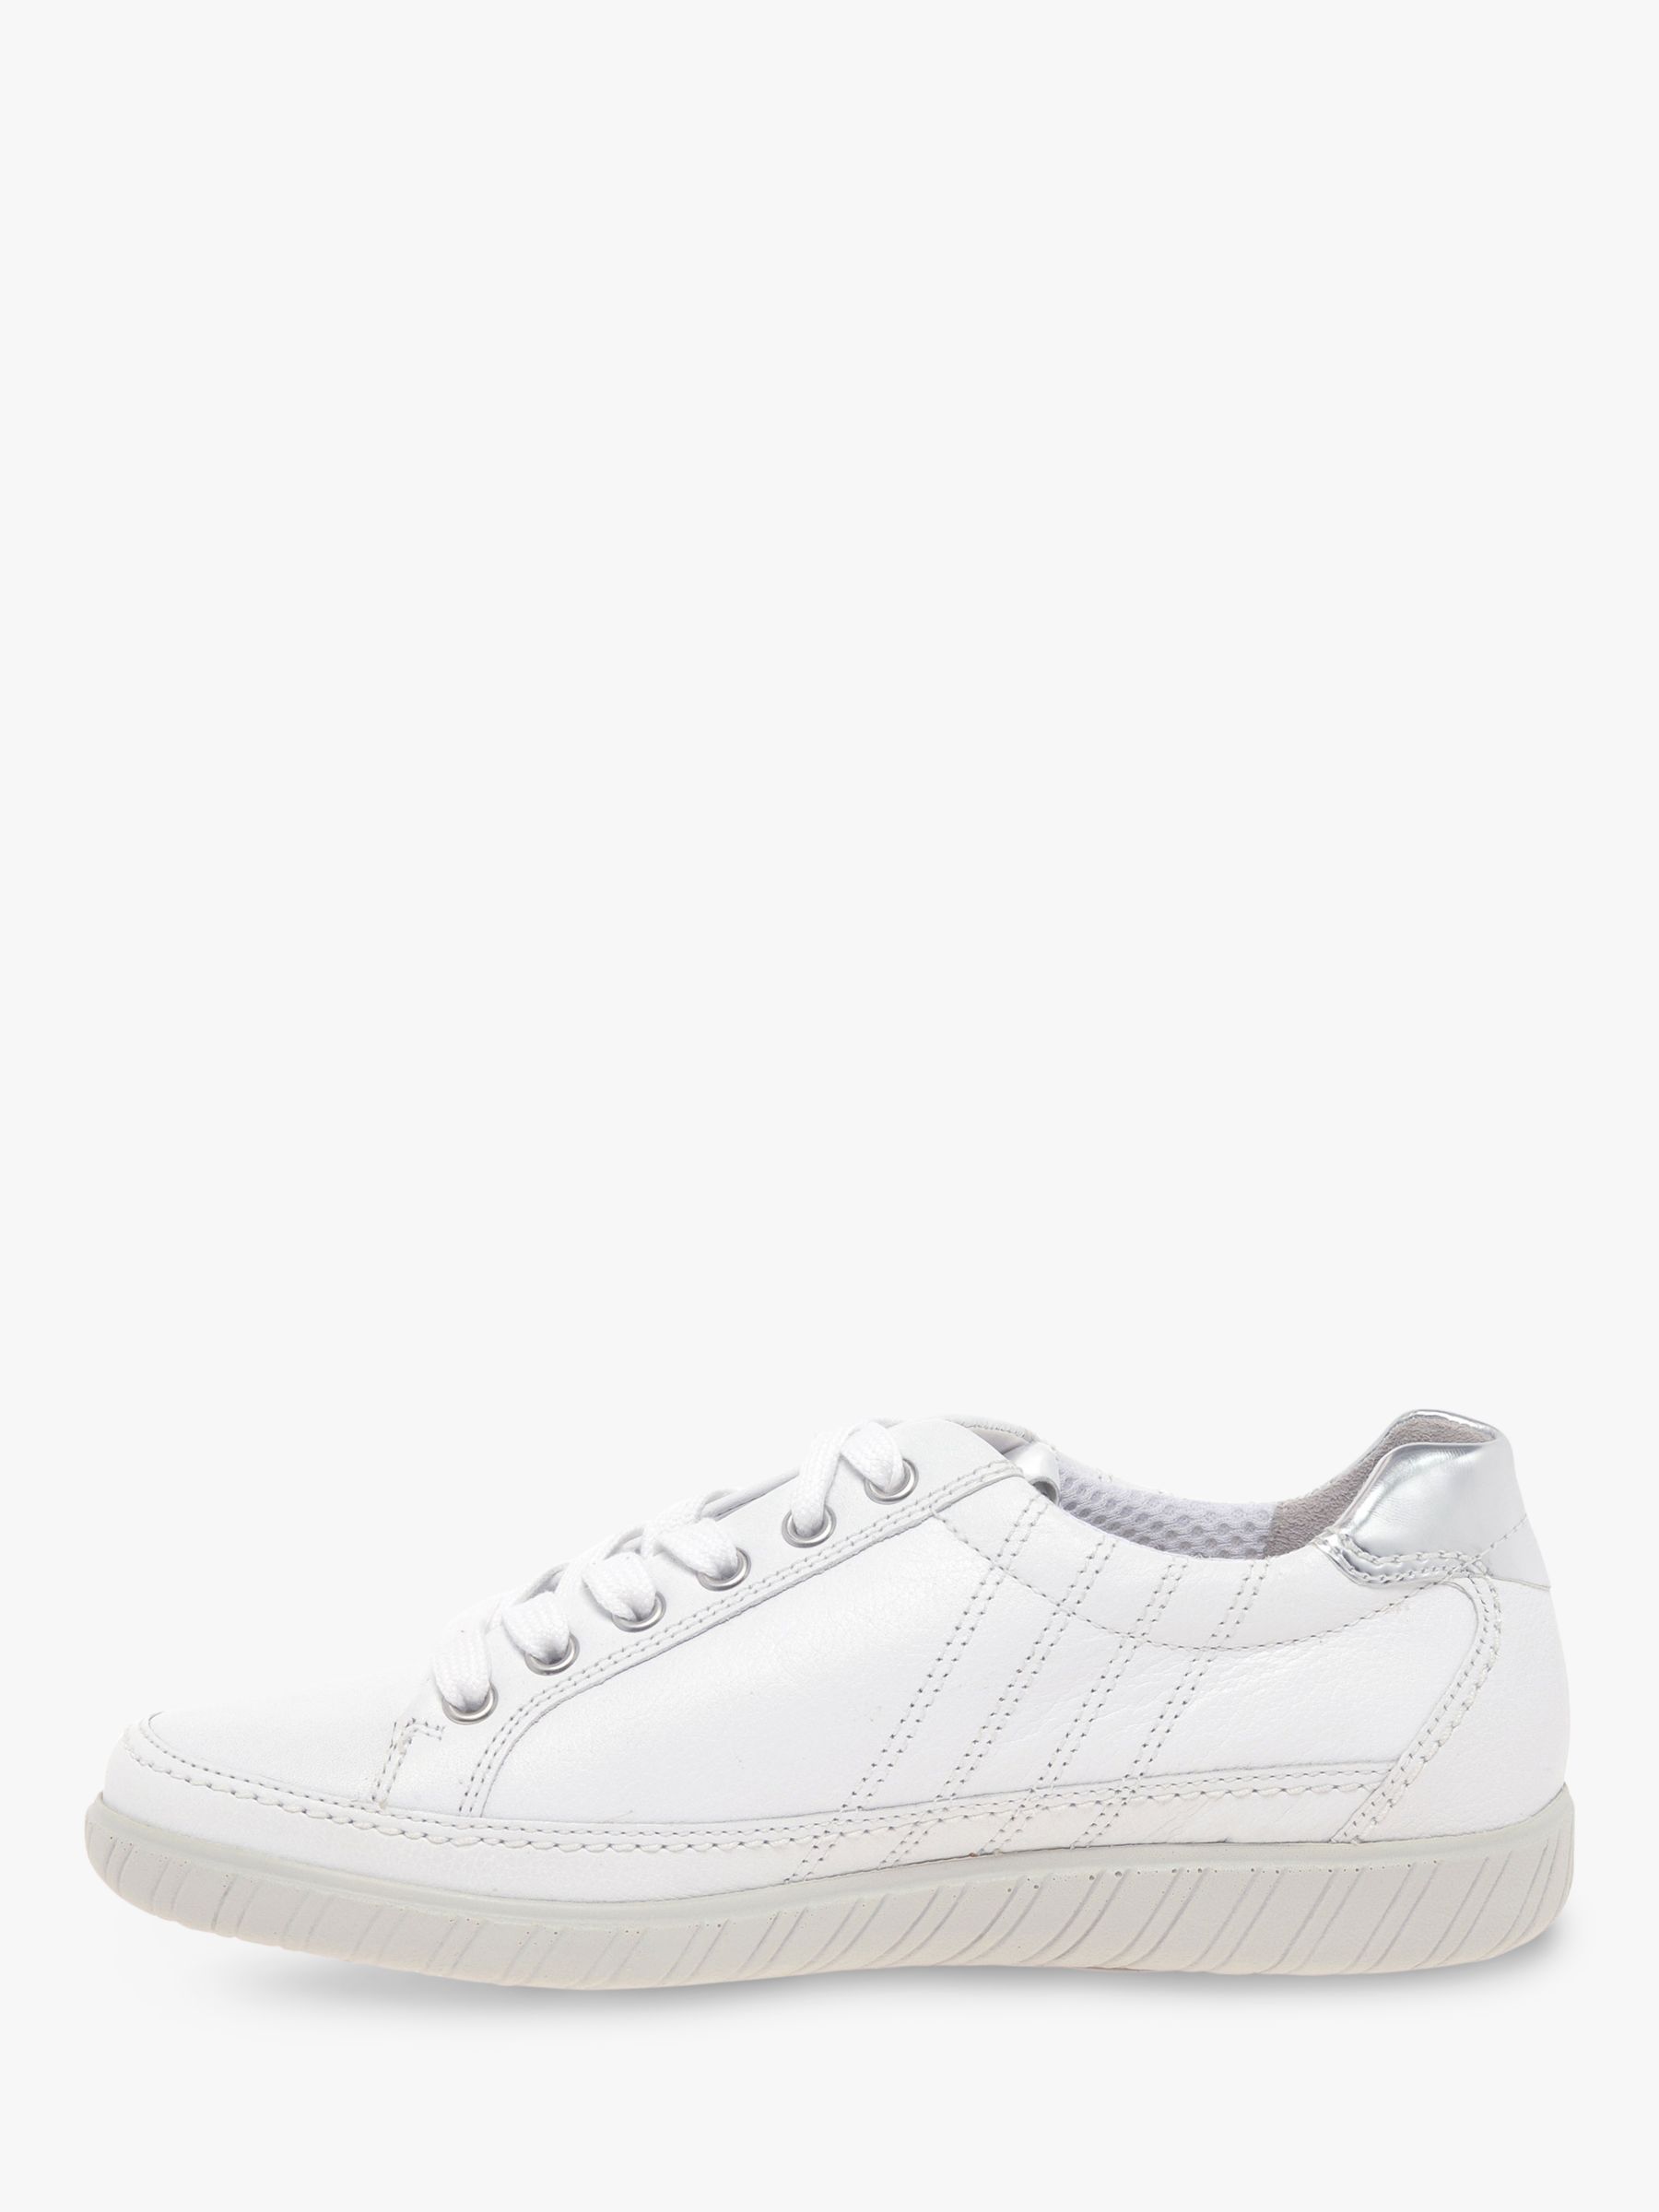 Buy Gabor Amulet Wide Fit Leather Trainers, White Online at johnlewis.com